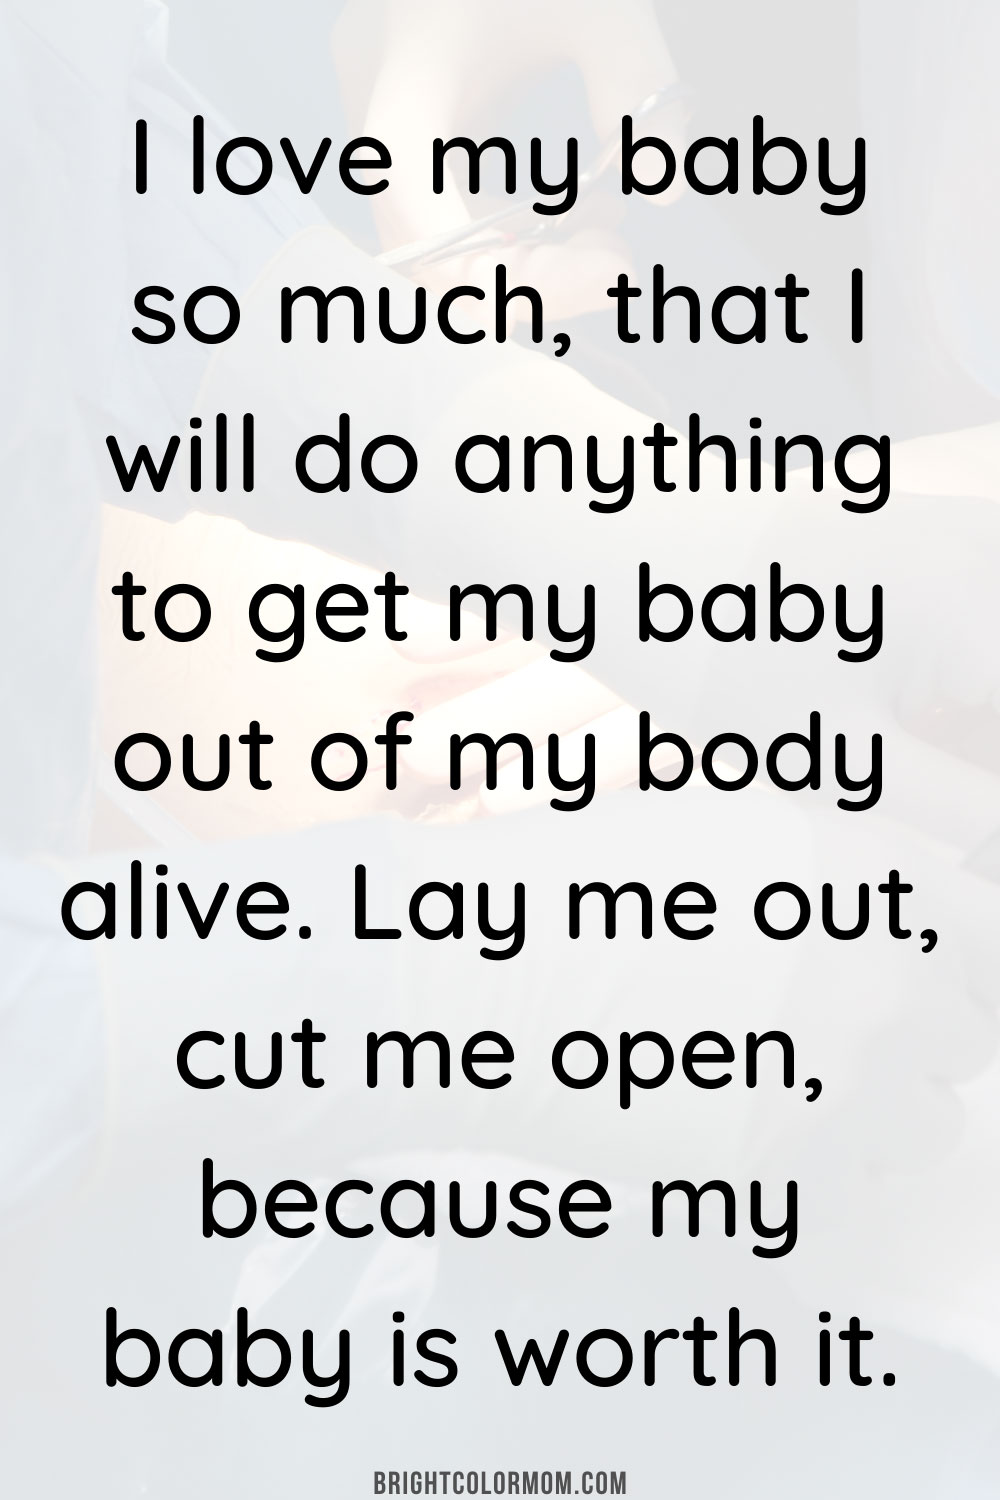 I love my baby so much, that I will do anything to get my baby out of my body alive. Lay me out, cut me open, because my baby is worth it.